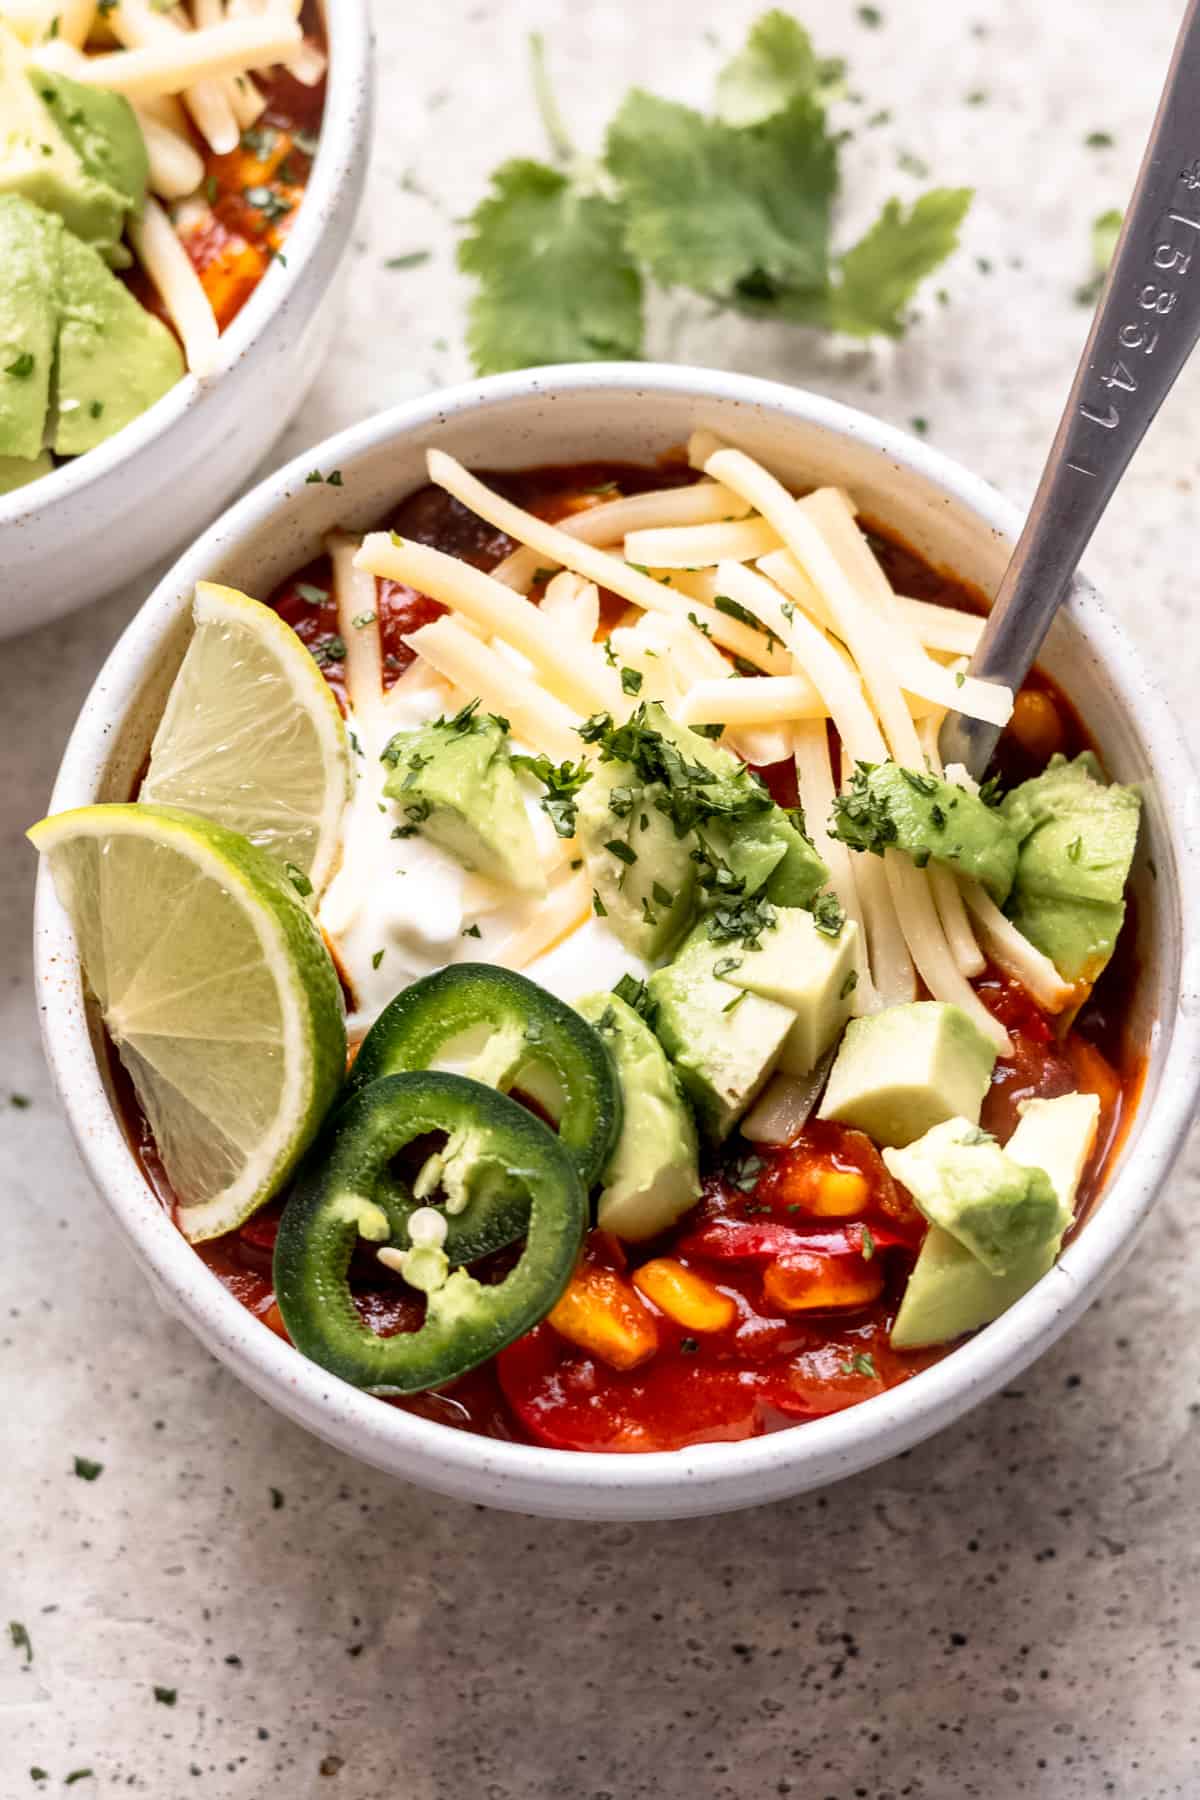 Chilli in a bowl with cheese.